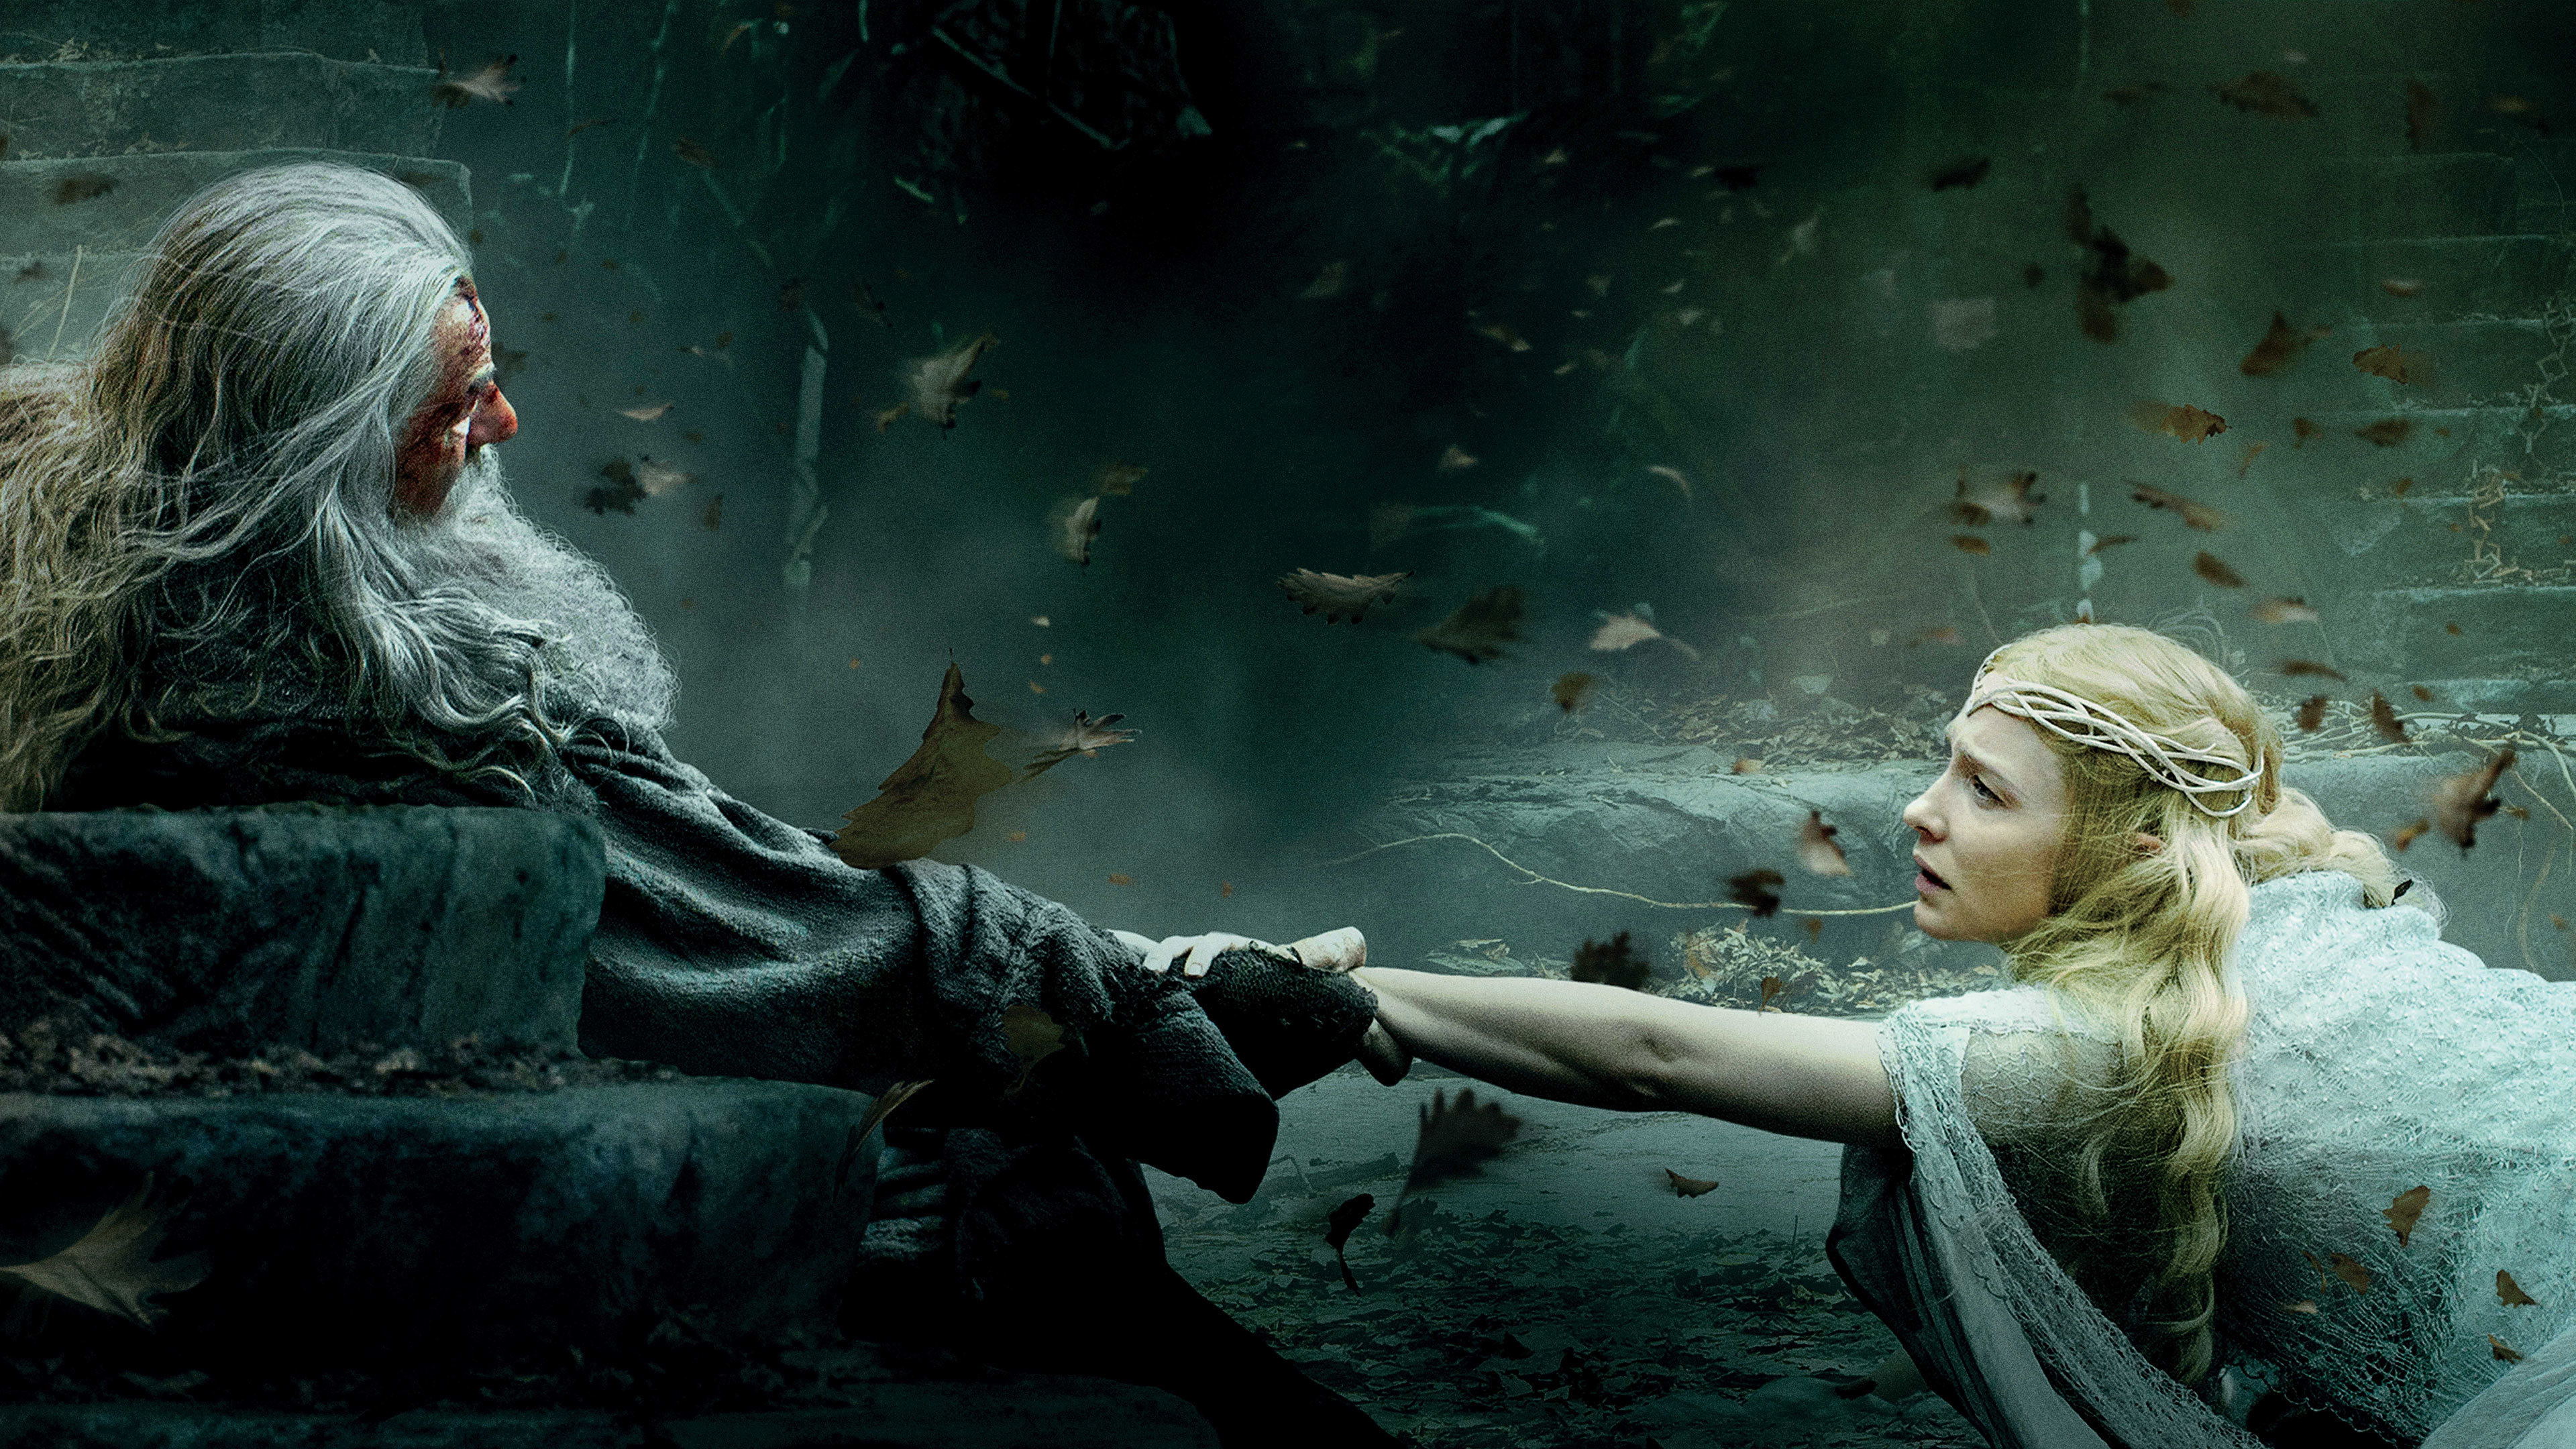 The Hobbit (Movie): Cate Blanchett as Galadriel, A royal Elf of both the Noldor and the Teleri. 3840x2160 4K Background.